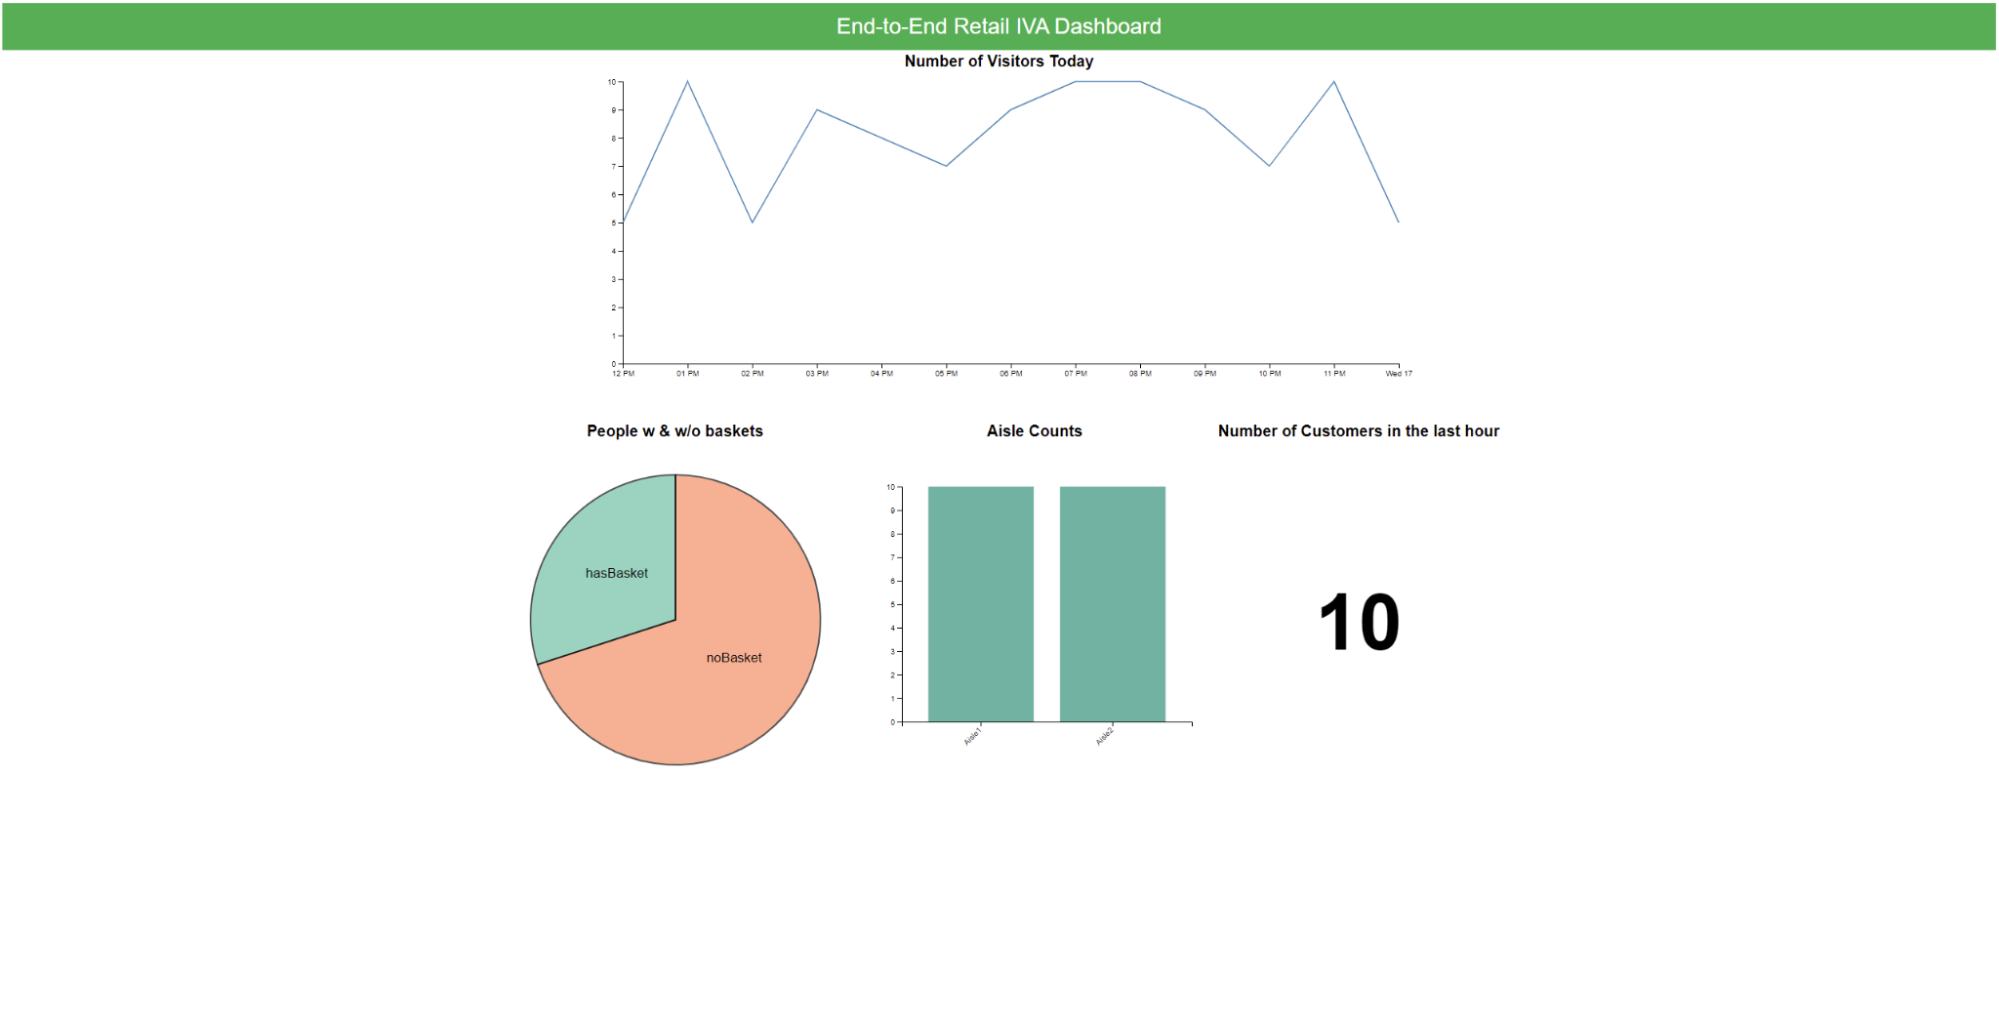 A dashboard with a line graph to track the number of visitors in a day, a pie chart with the ratio of customers with basket and without baskets, a bar graph with the number of customers in each aisle, and a number to depict the number of visitors in the last hour.